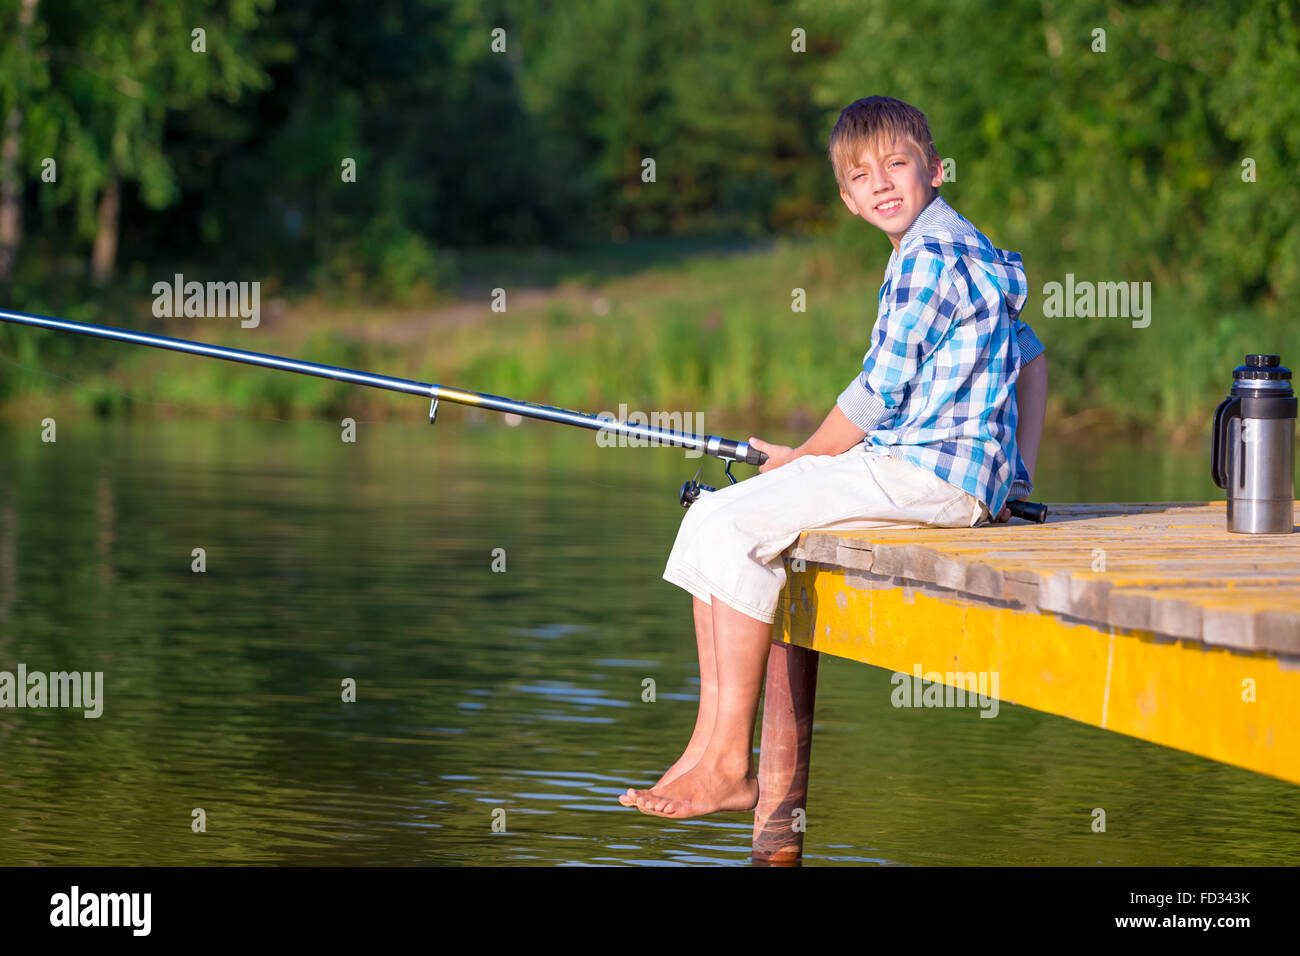 Funny Happy Little Kid Fishing on Weekend. a Fisherman Boy Stands in the  Lake with a Fishing Rod and Catches Fish. Stock Photo - Image of play,  toddler: 302837444